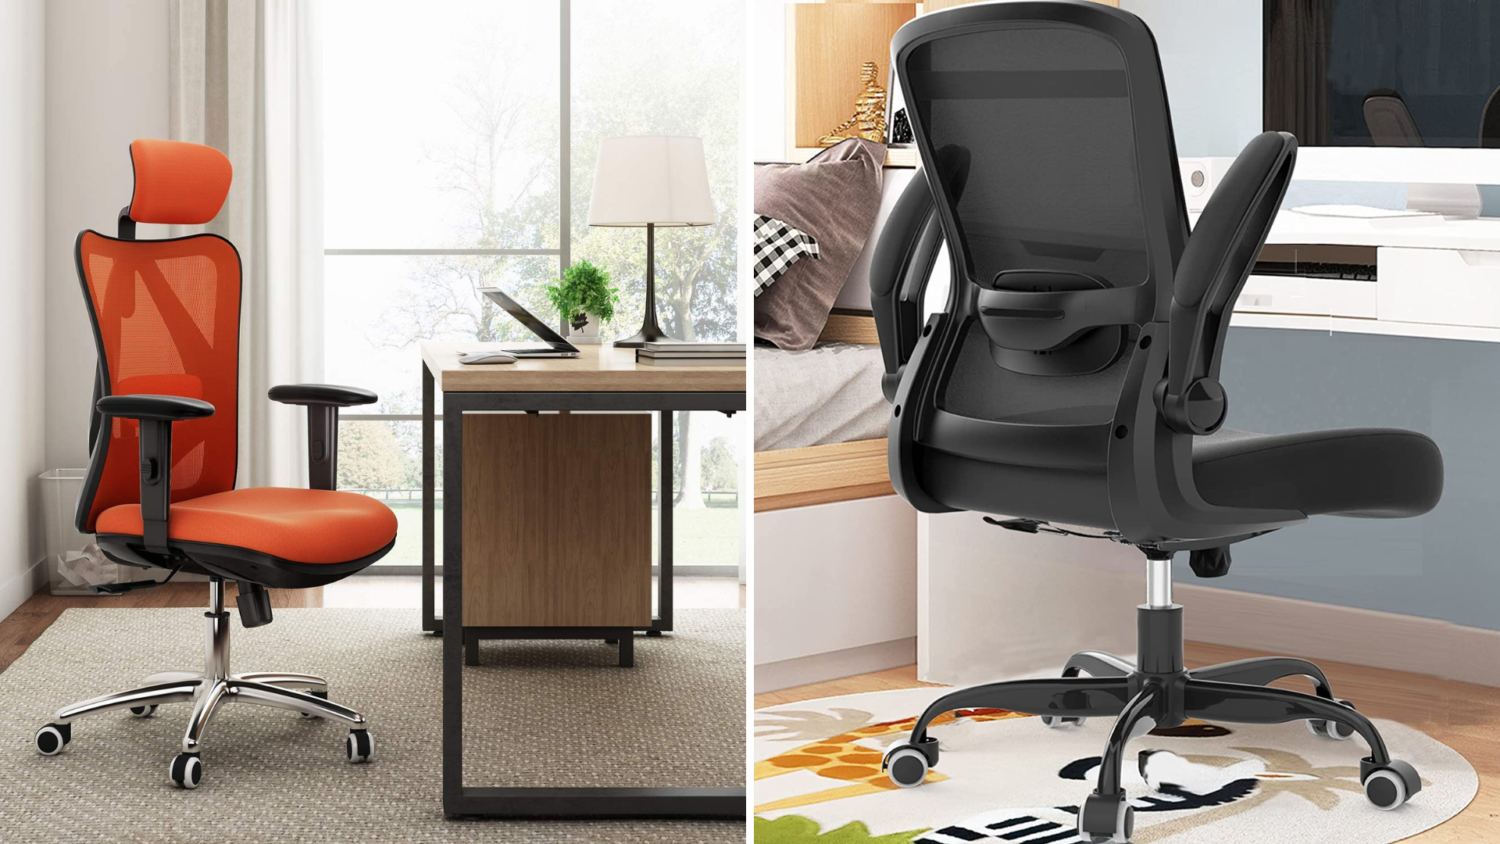 These ergonomic office chairs are top-sellers on Amazon